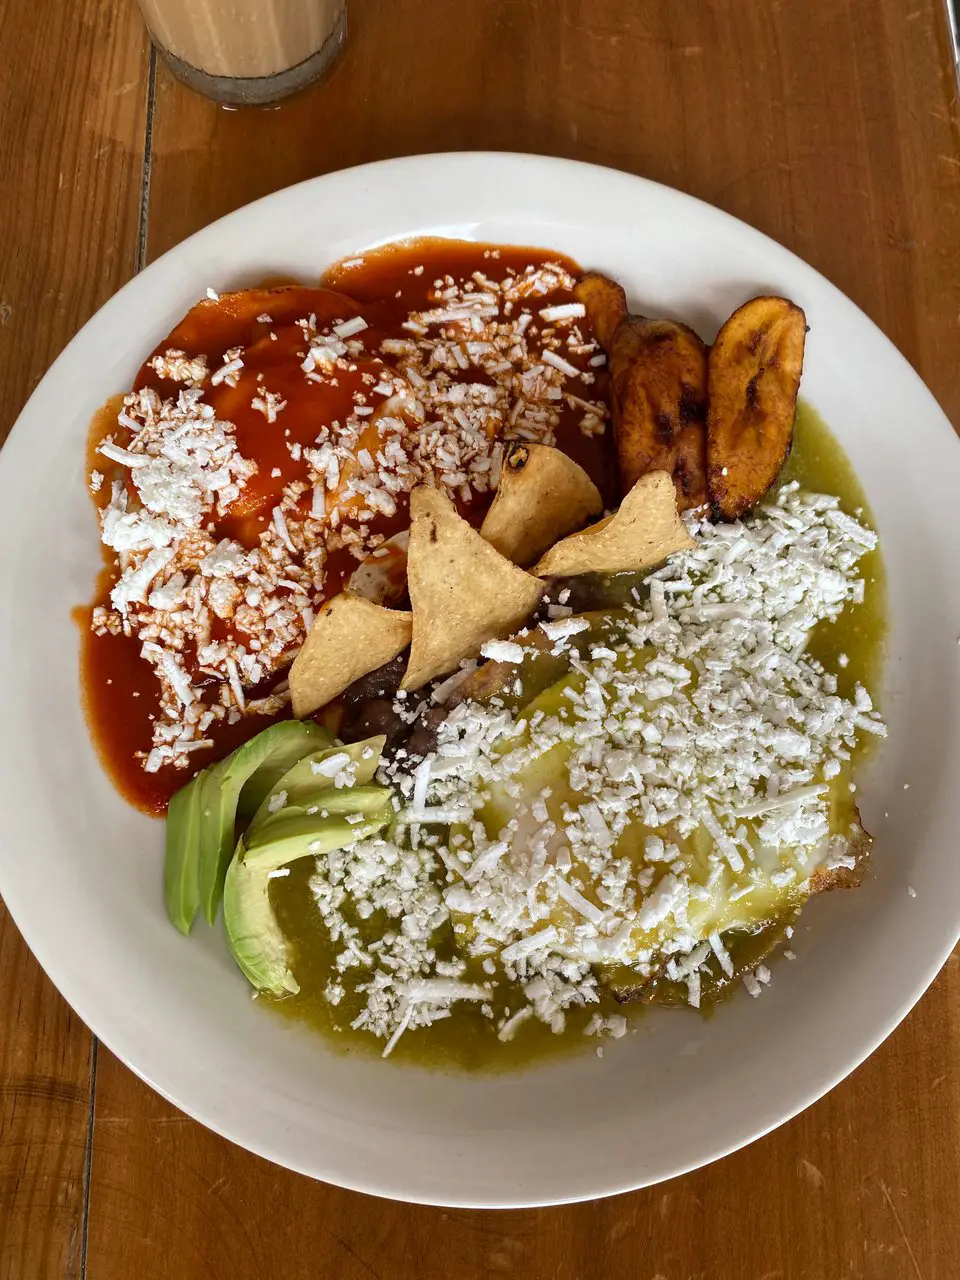 Half red and half green enchiladas on a plate, separated by a line of tortilla chips, avocado and plantain. This is typical Mexican food.